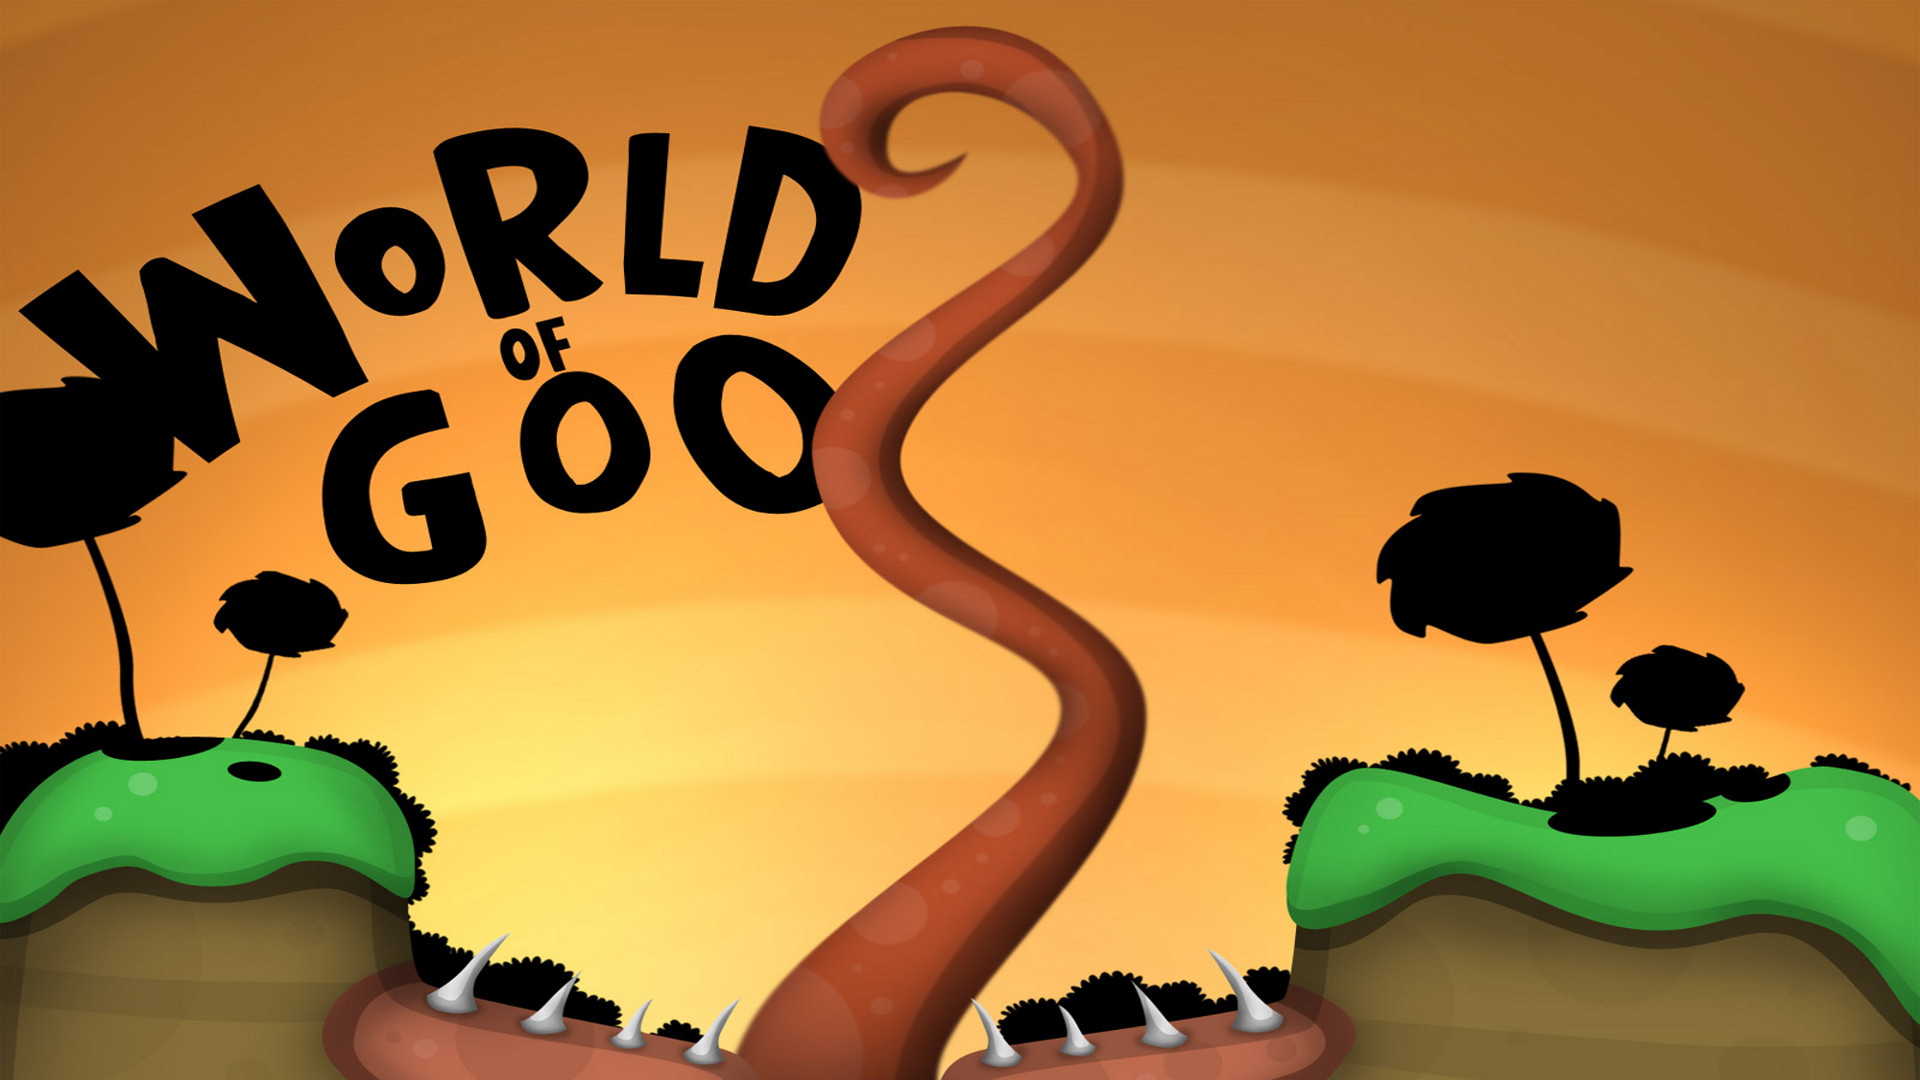 Video Game World of Goo HD Wallpaper | Background Image